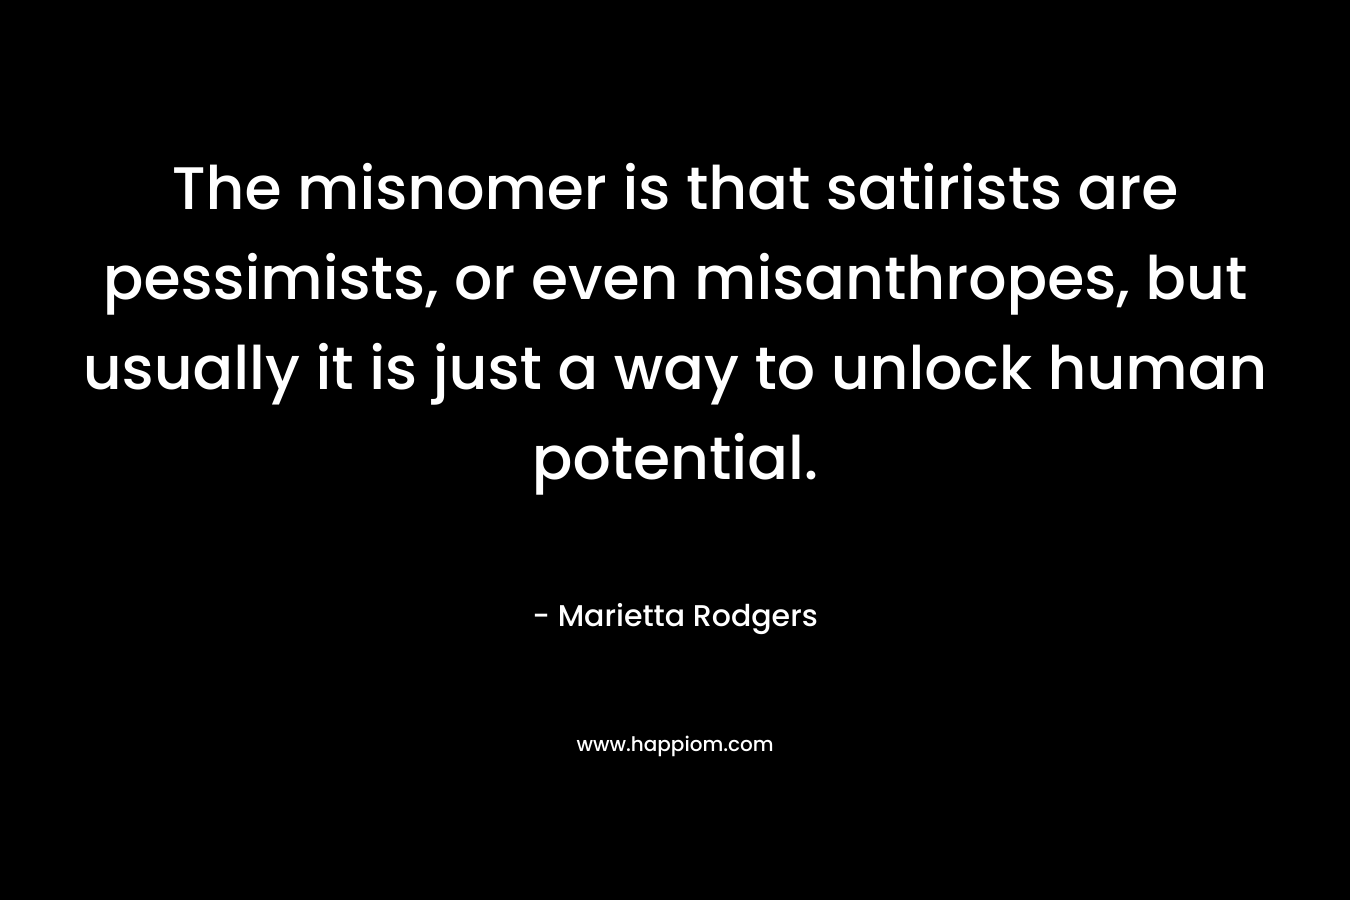 The misnomer is that satirists are pessimists, or even misanthropes, but usually it is just a way to unlock human potential.